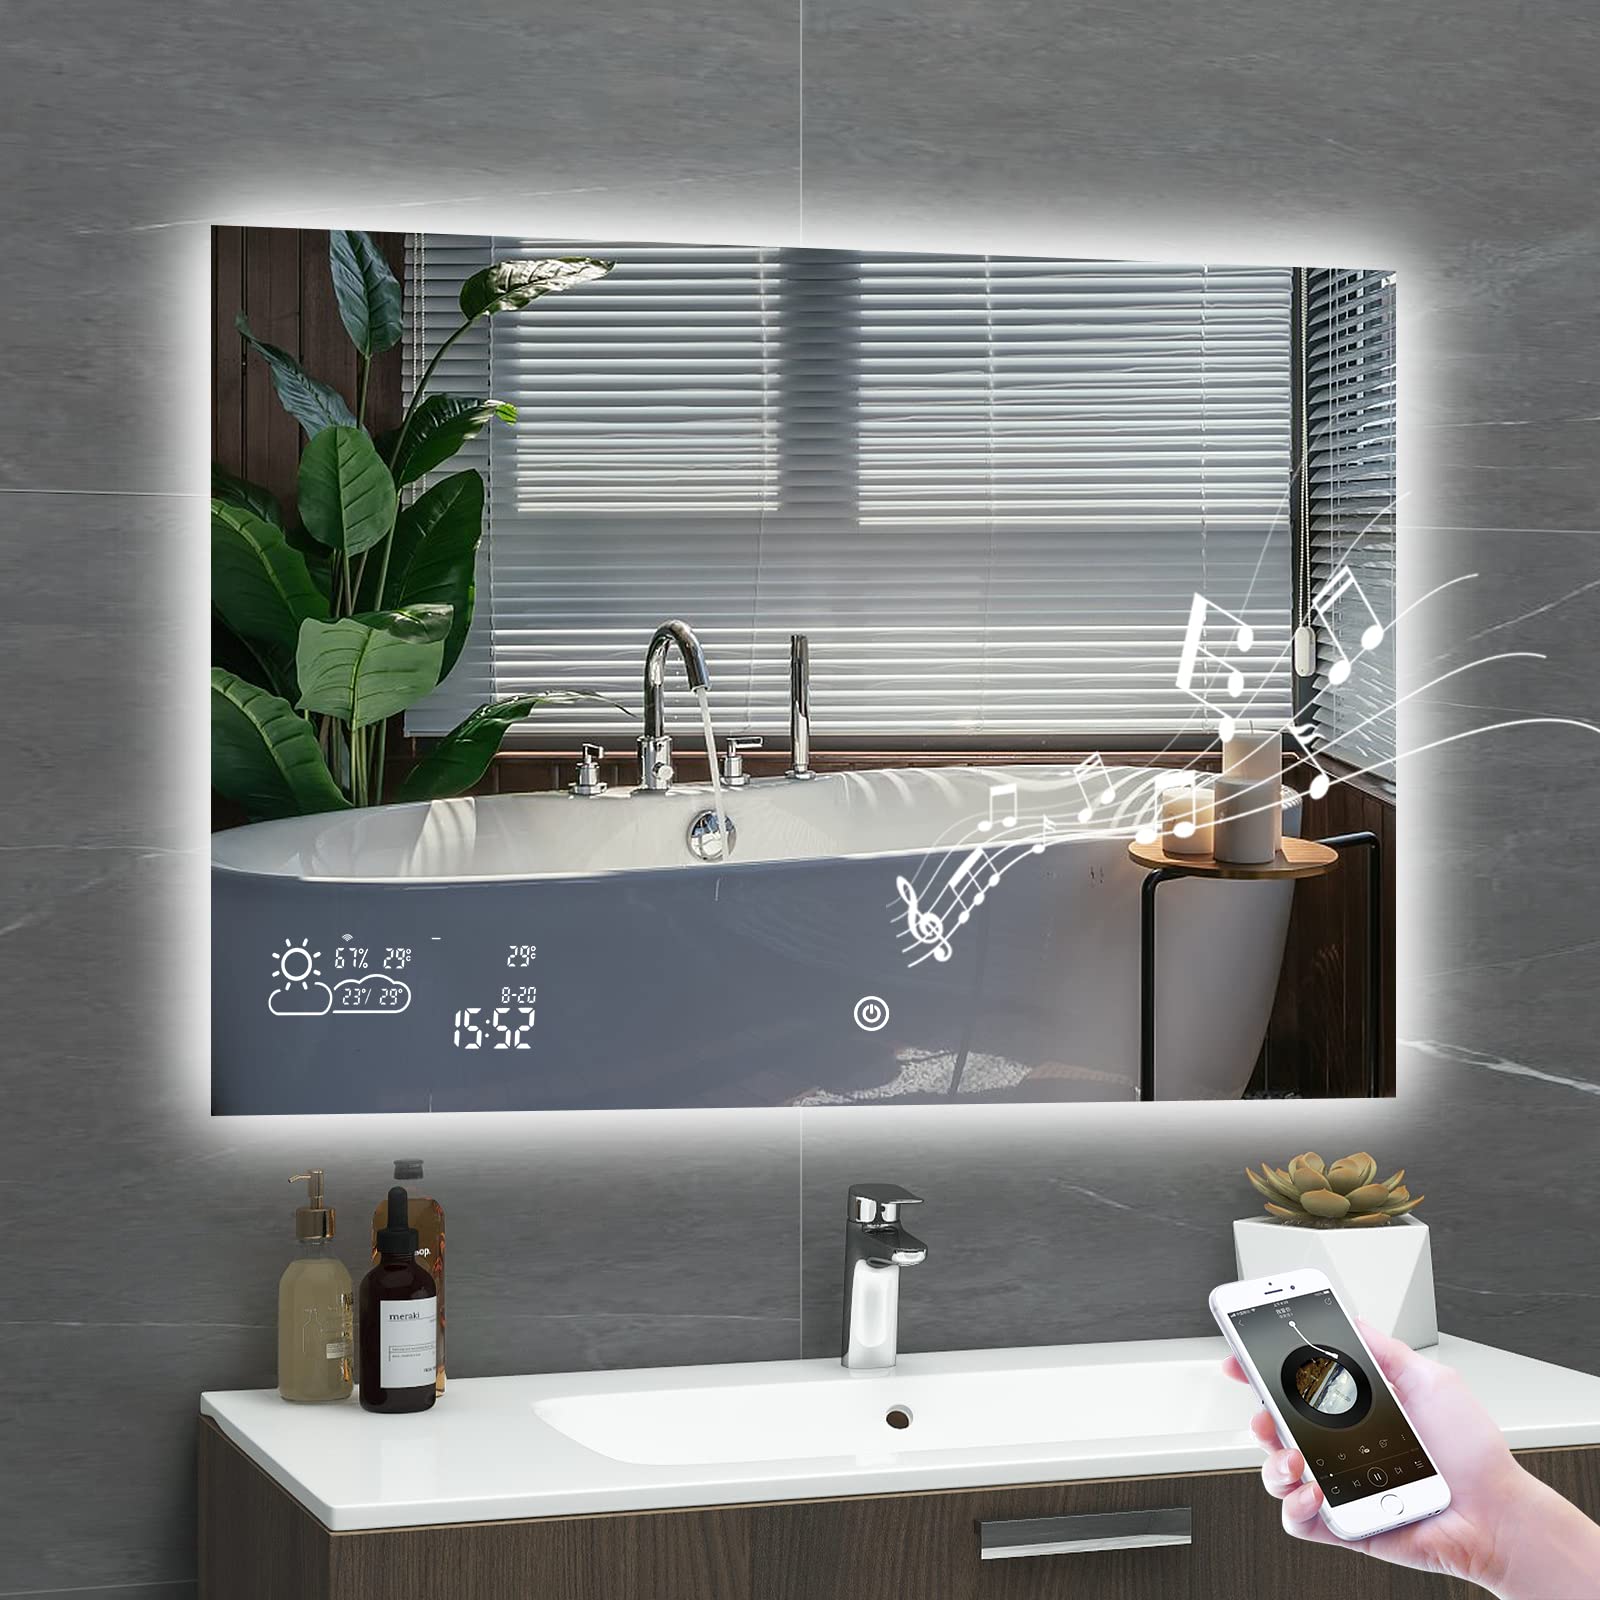 Why Does A Bluetooth Mirror Getting So Popular Today?